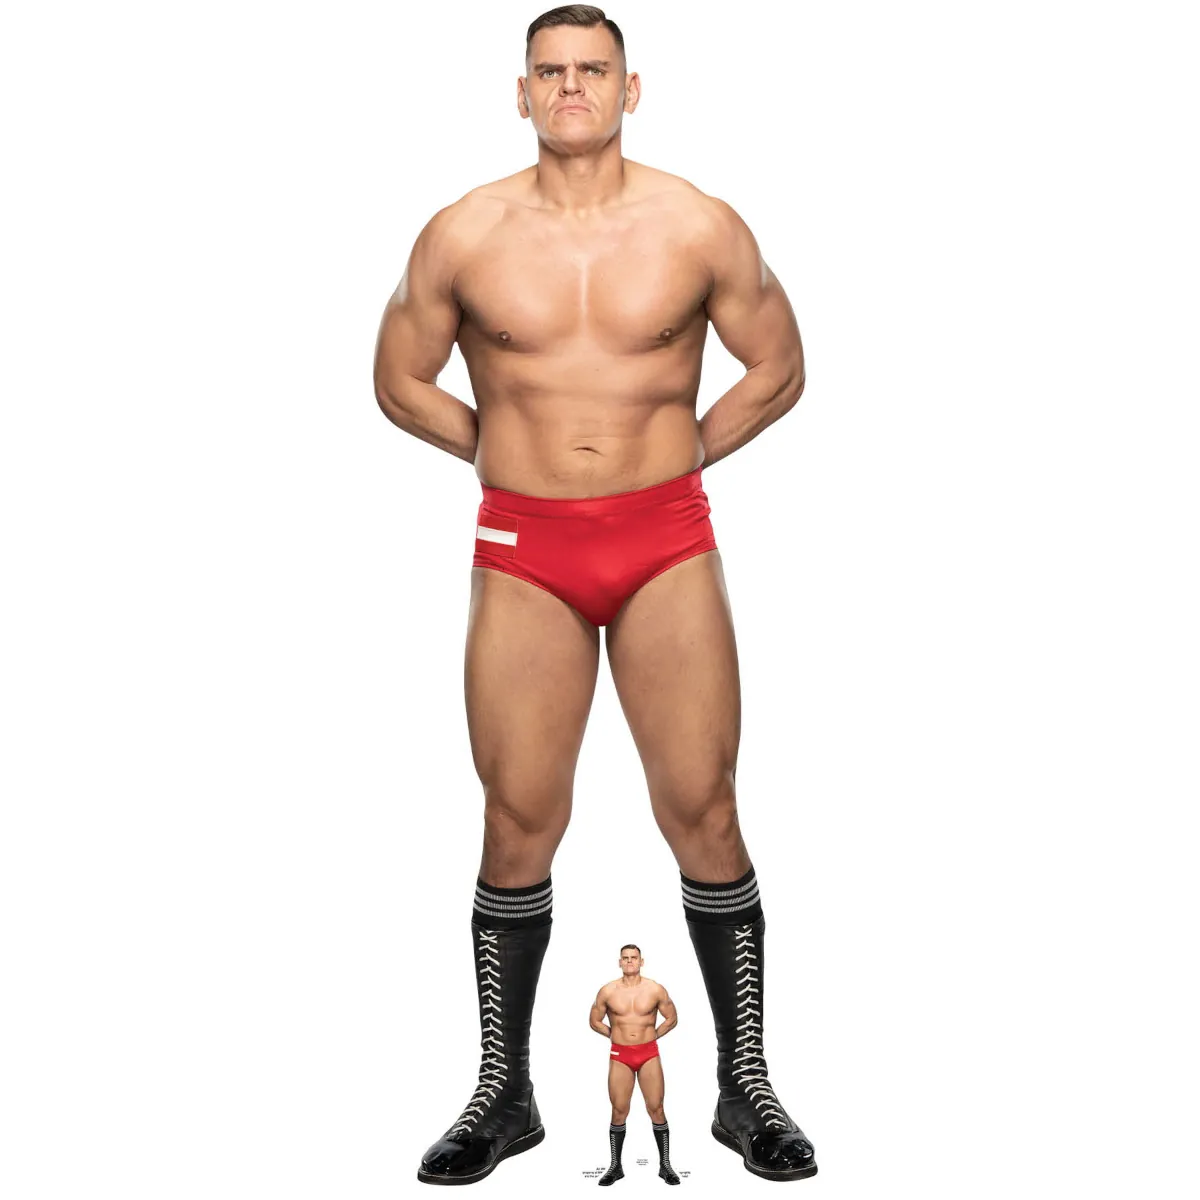 SC4165 Gunther (WWE) Official Lifesize + Mini Cardboard Cutout Standee Front